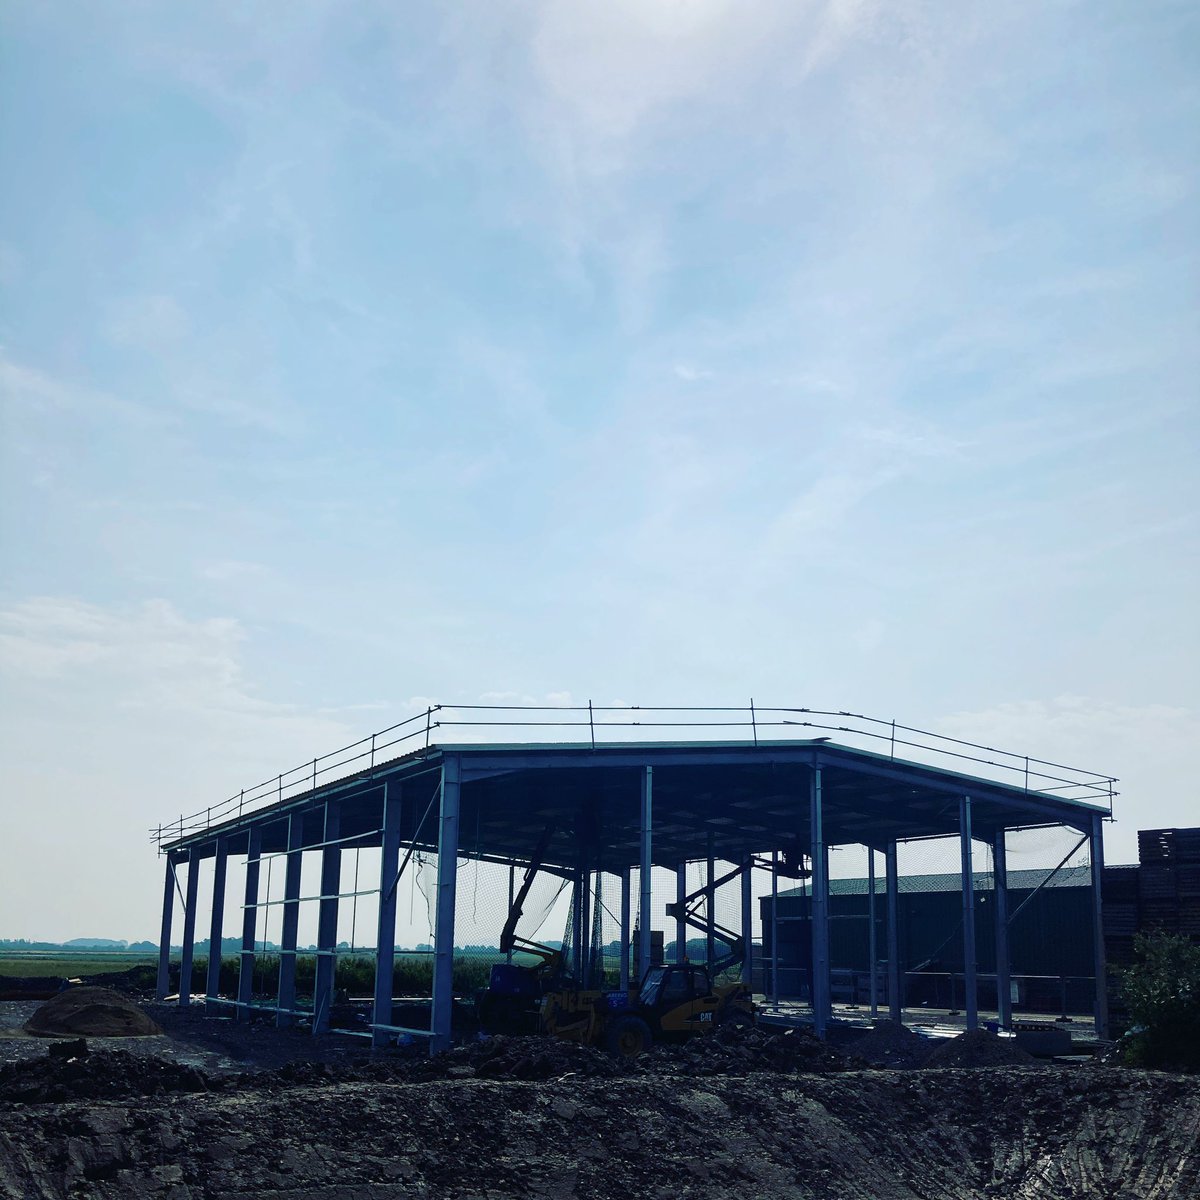 Roof is on! The new cold store is taking shape! #potatoes #farming #potatoefarming #Construction